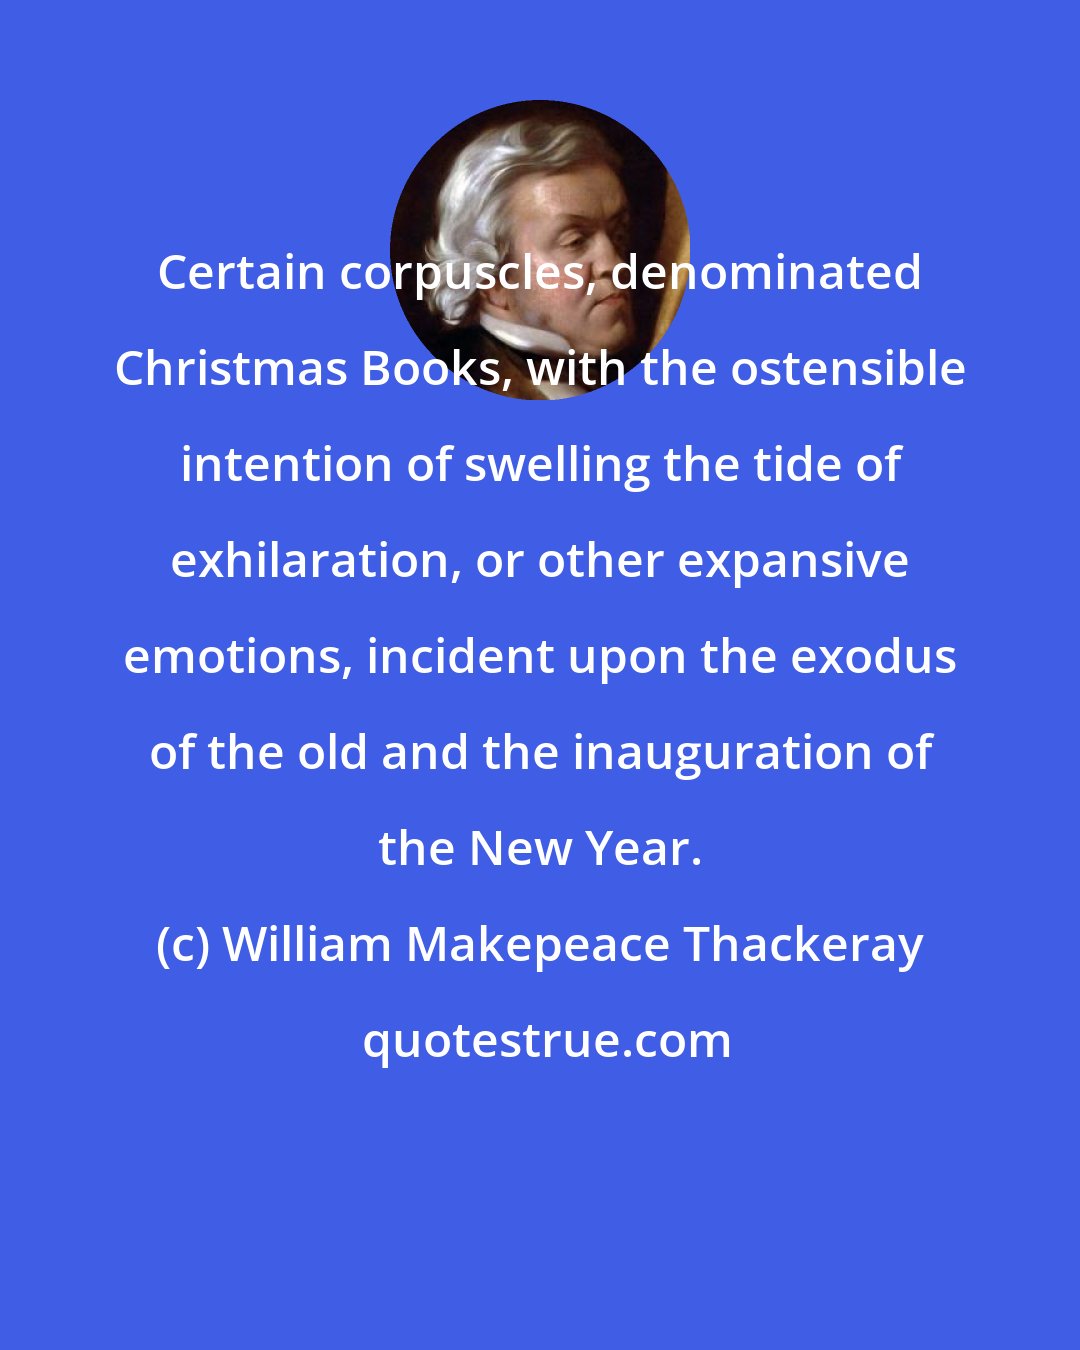 William Makepeace Thackeray: Certain corpuscles, denominated Christmas Books, with the ostensible intention of swelling the tide of exhilaration, or other expansive emotions, incident upon the exodus of the old and the inauguration of the New Year.